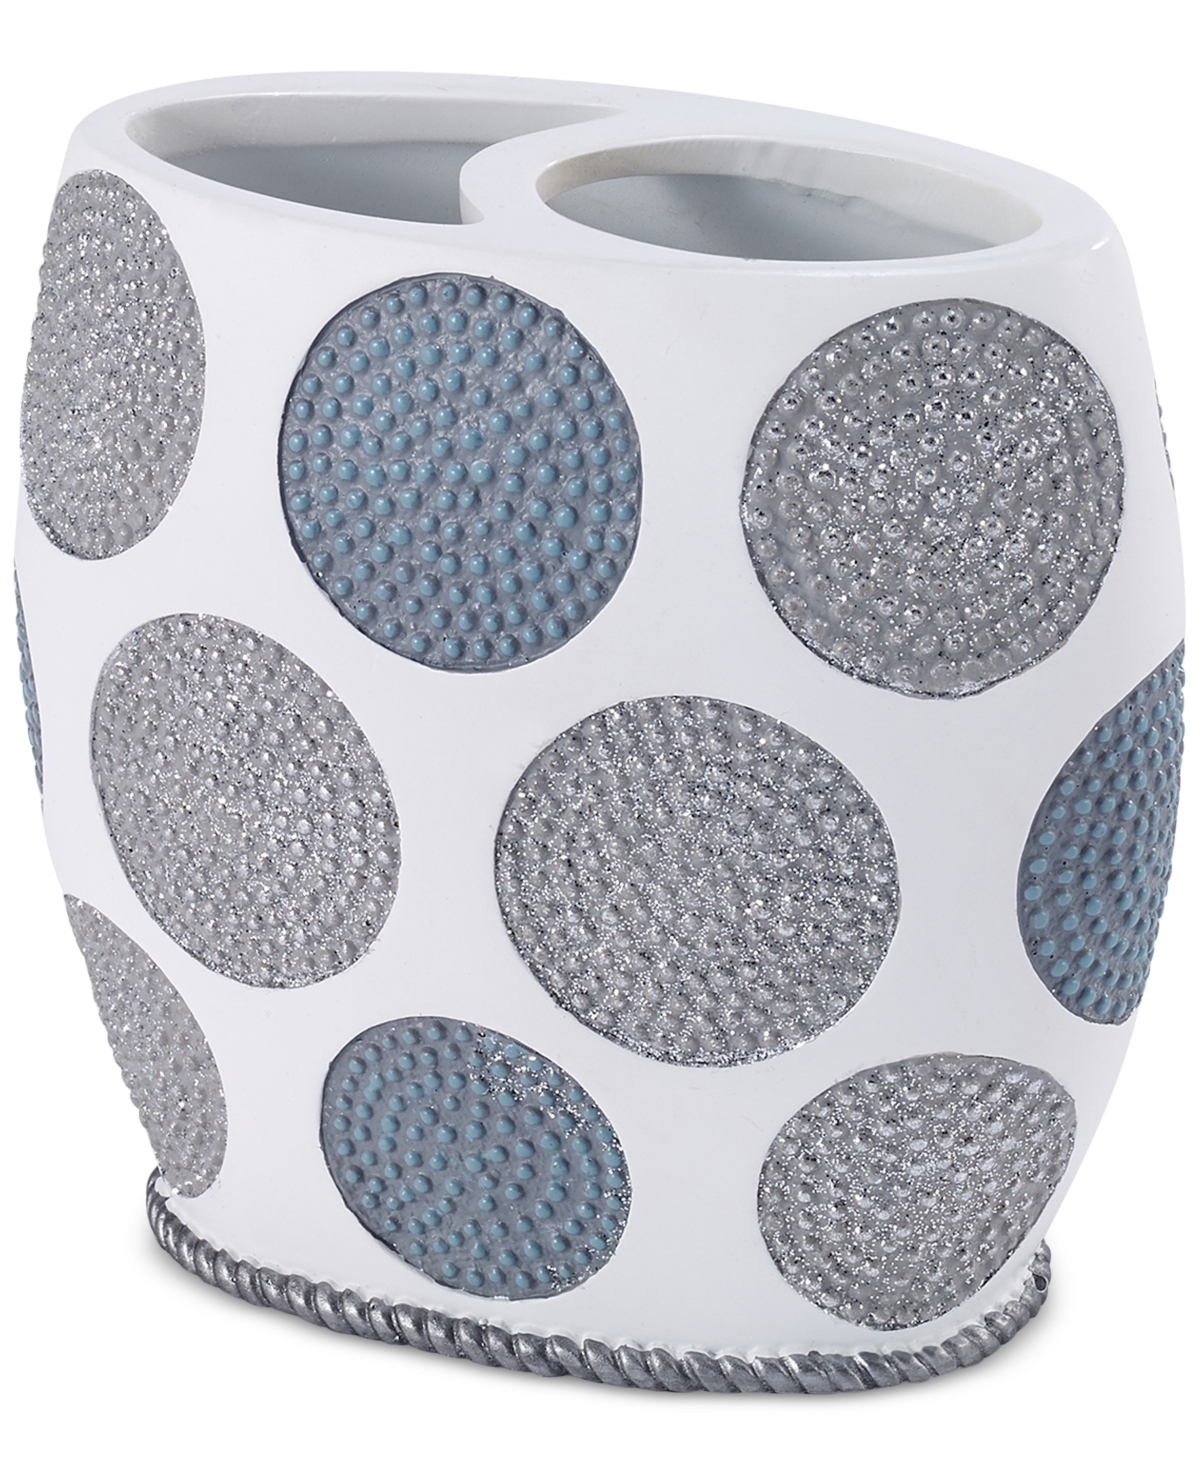 Dotted Circle Textured Resin Toothbrush Holder - Blue/Silver